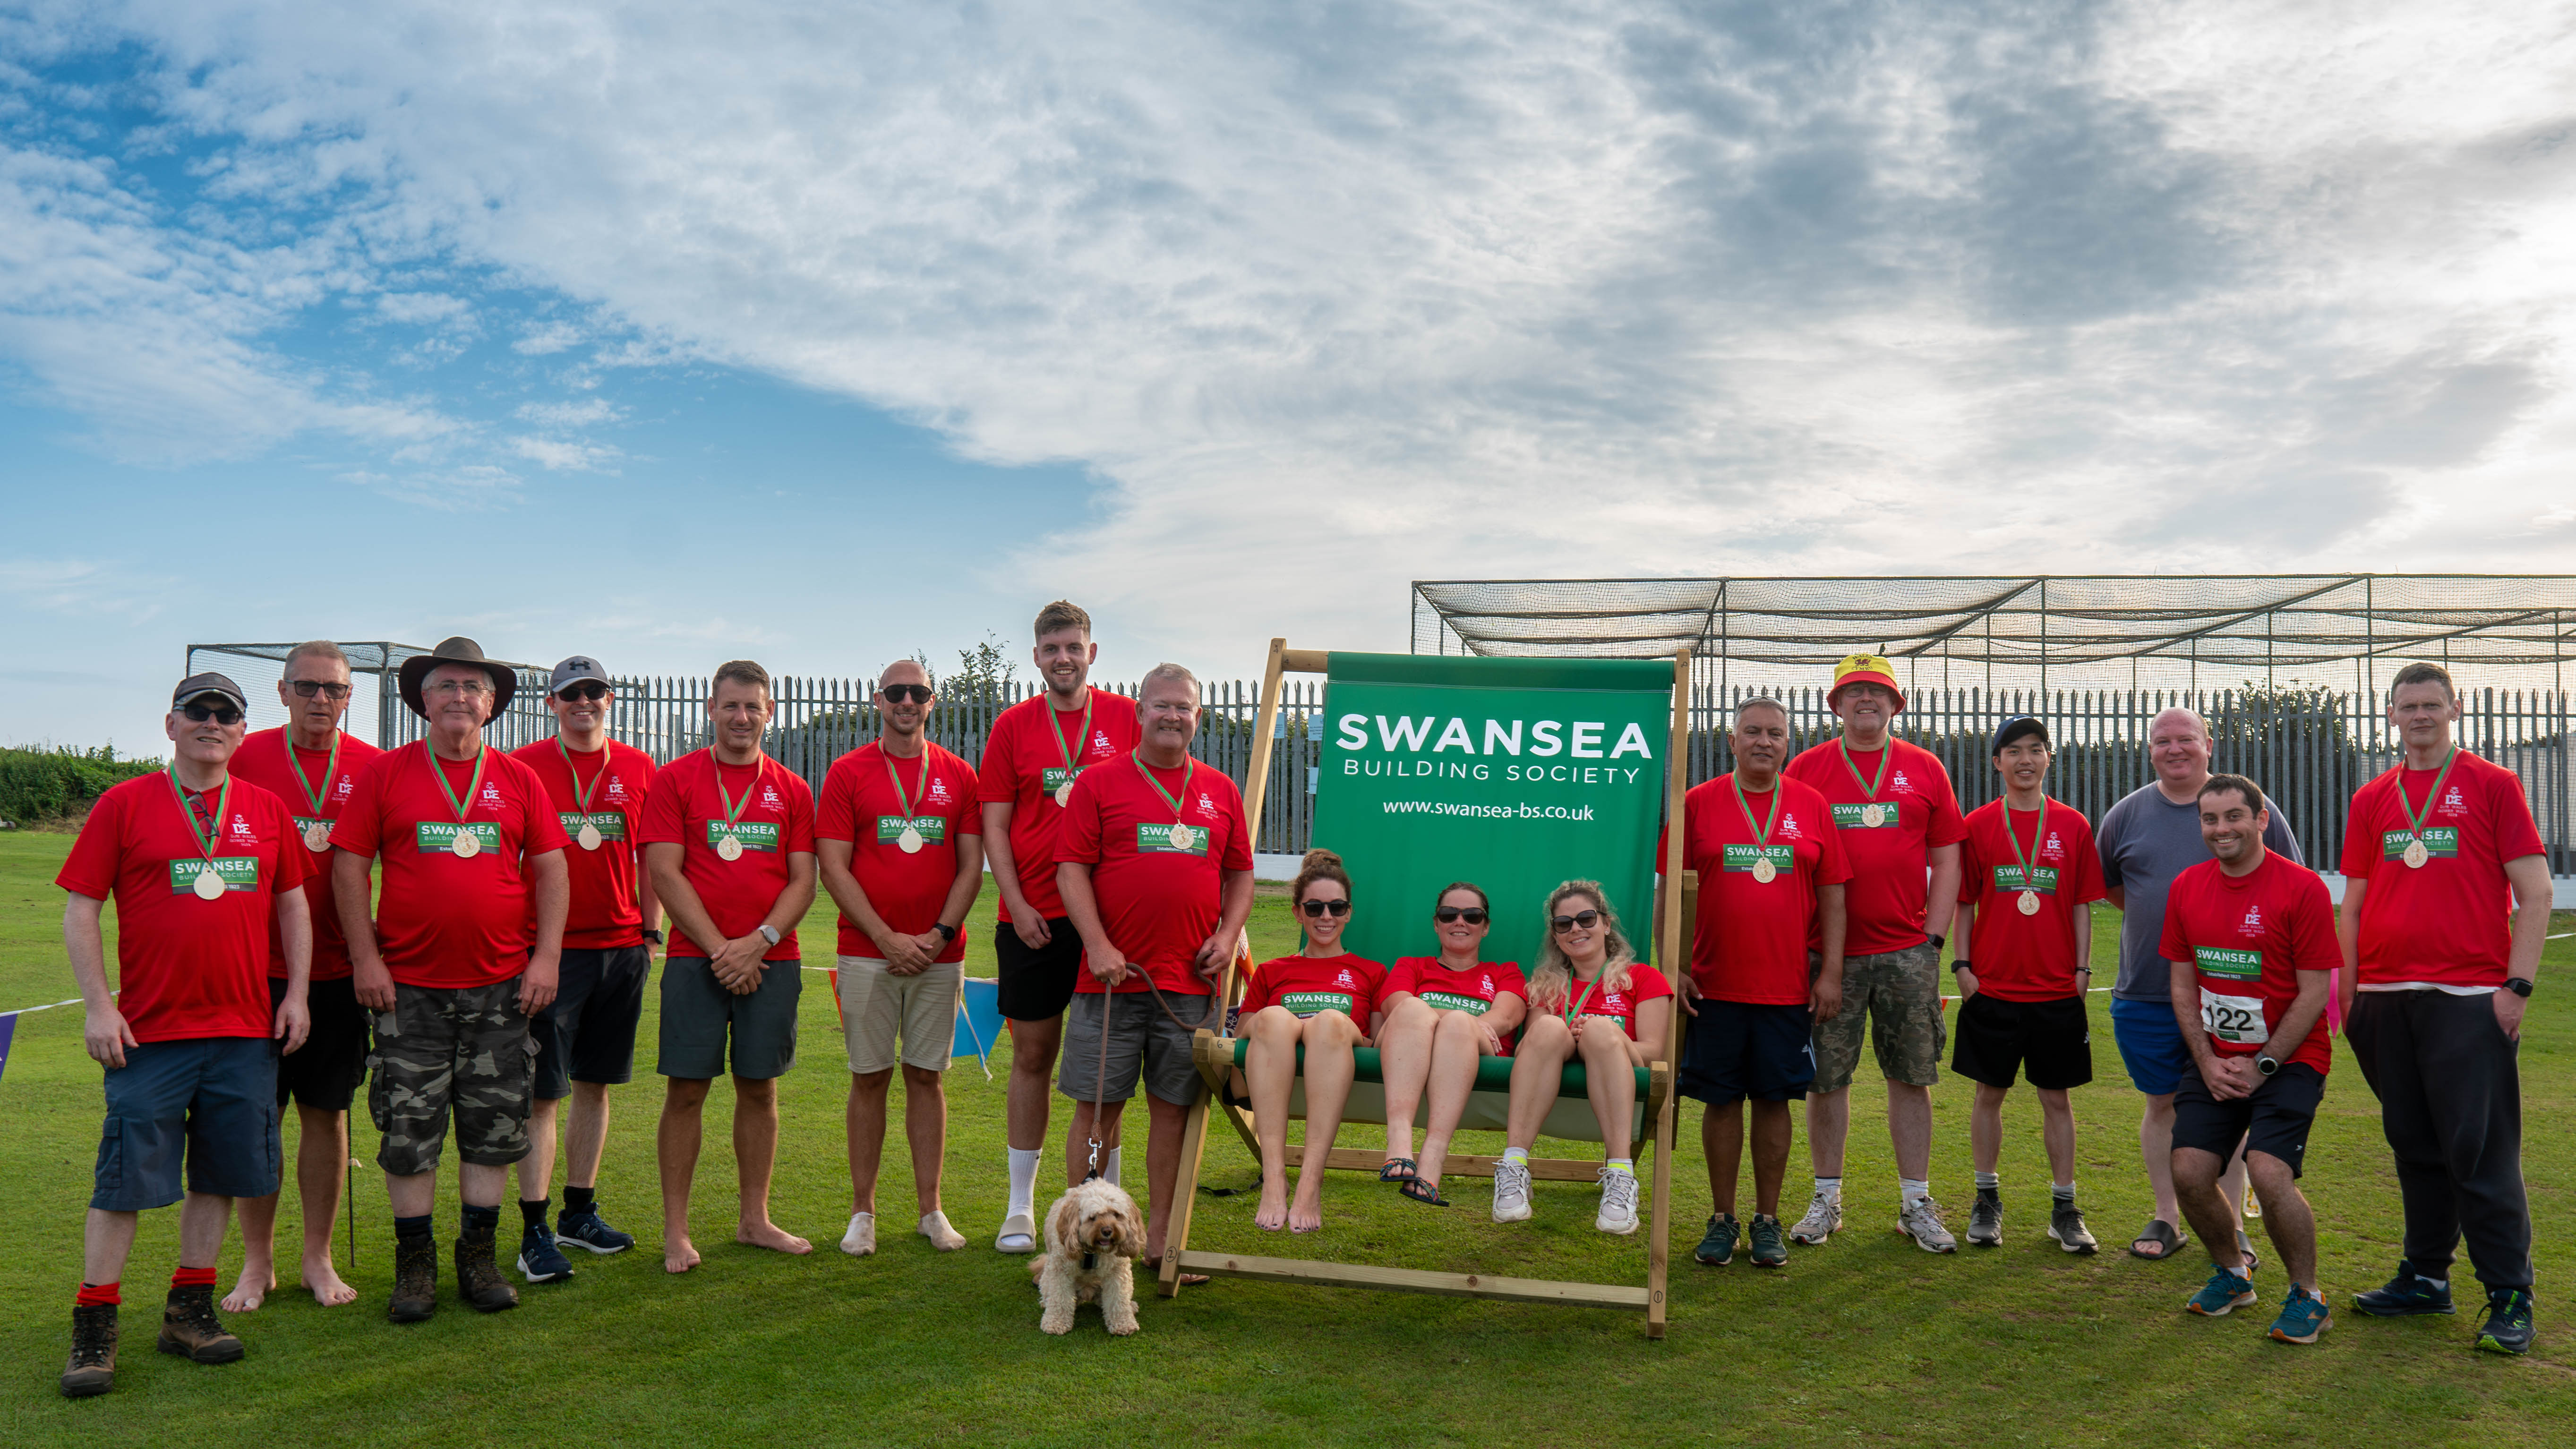 DofE Wales Gower Walk Challenge raises £40K with Swansea Building Society's Support